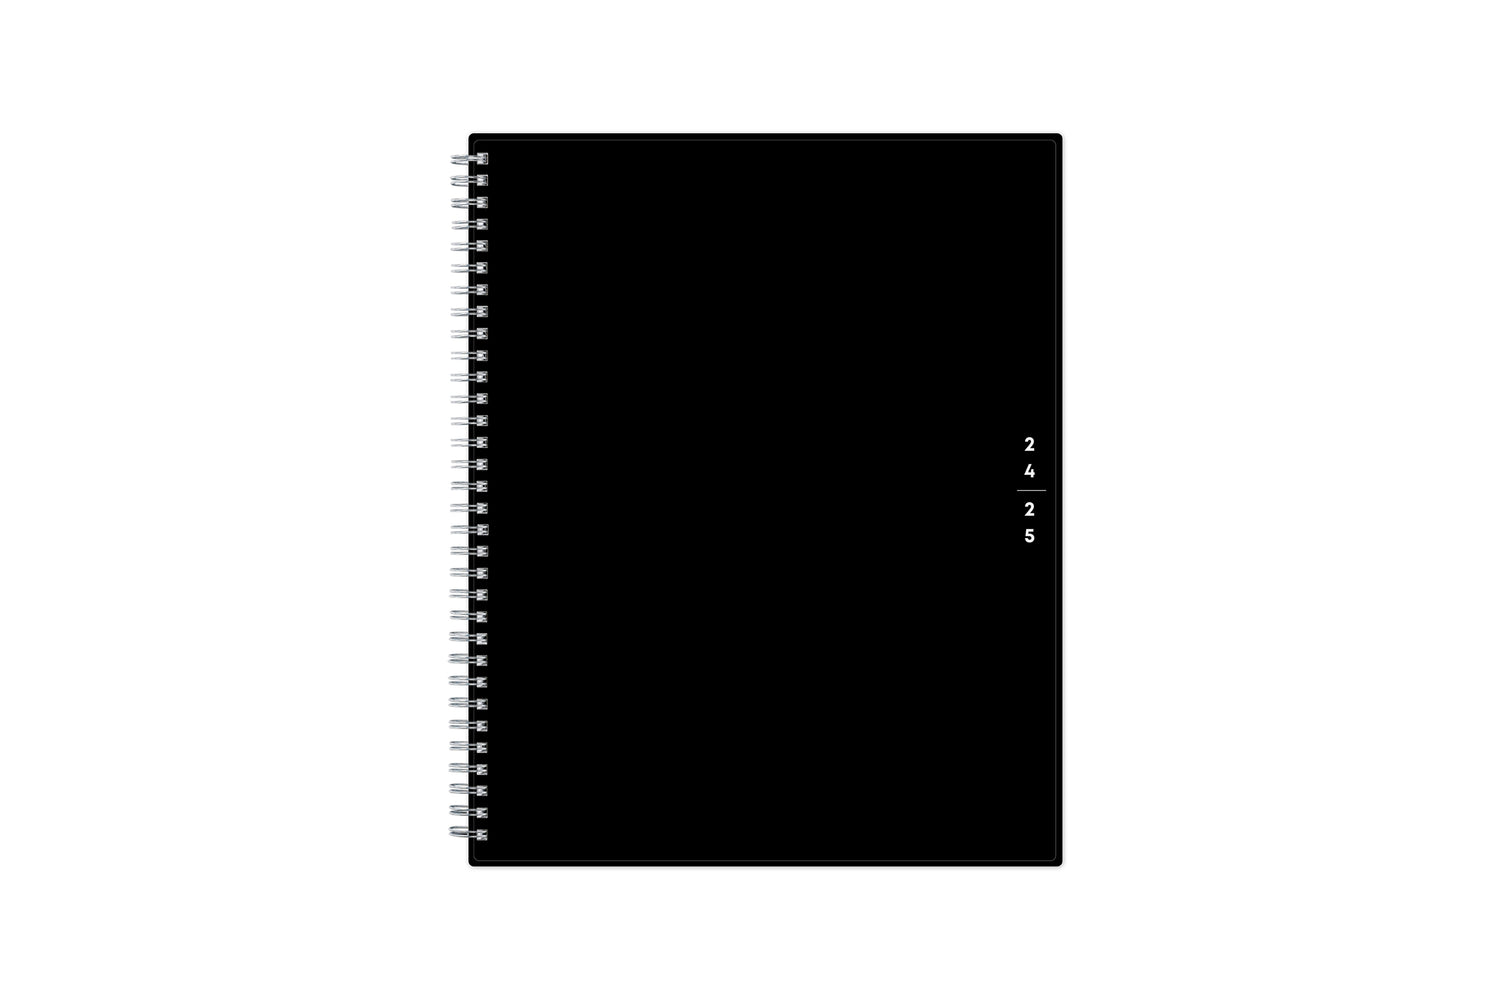  academic teacher lesson planner with weekly and monthly layouts featuring a solid black front cover in 8.5x11 planner size